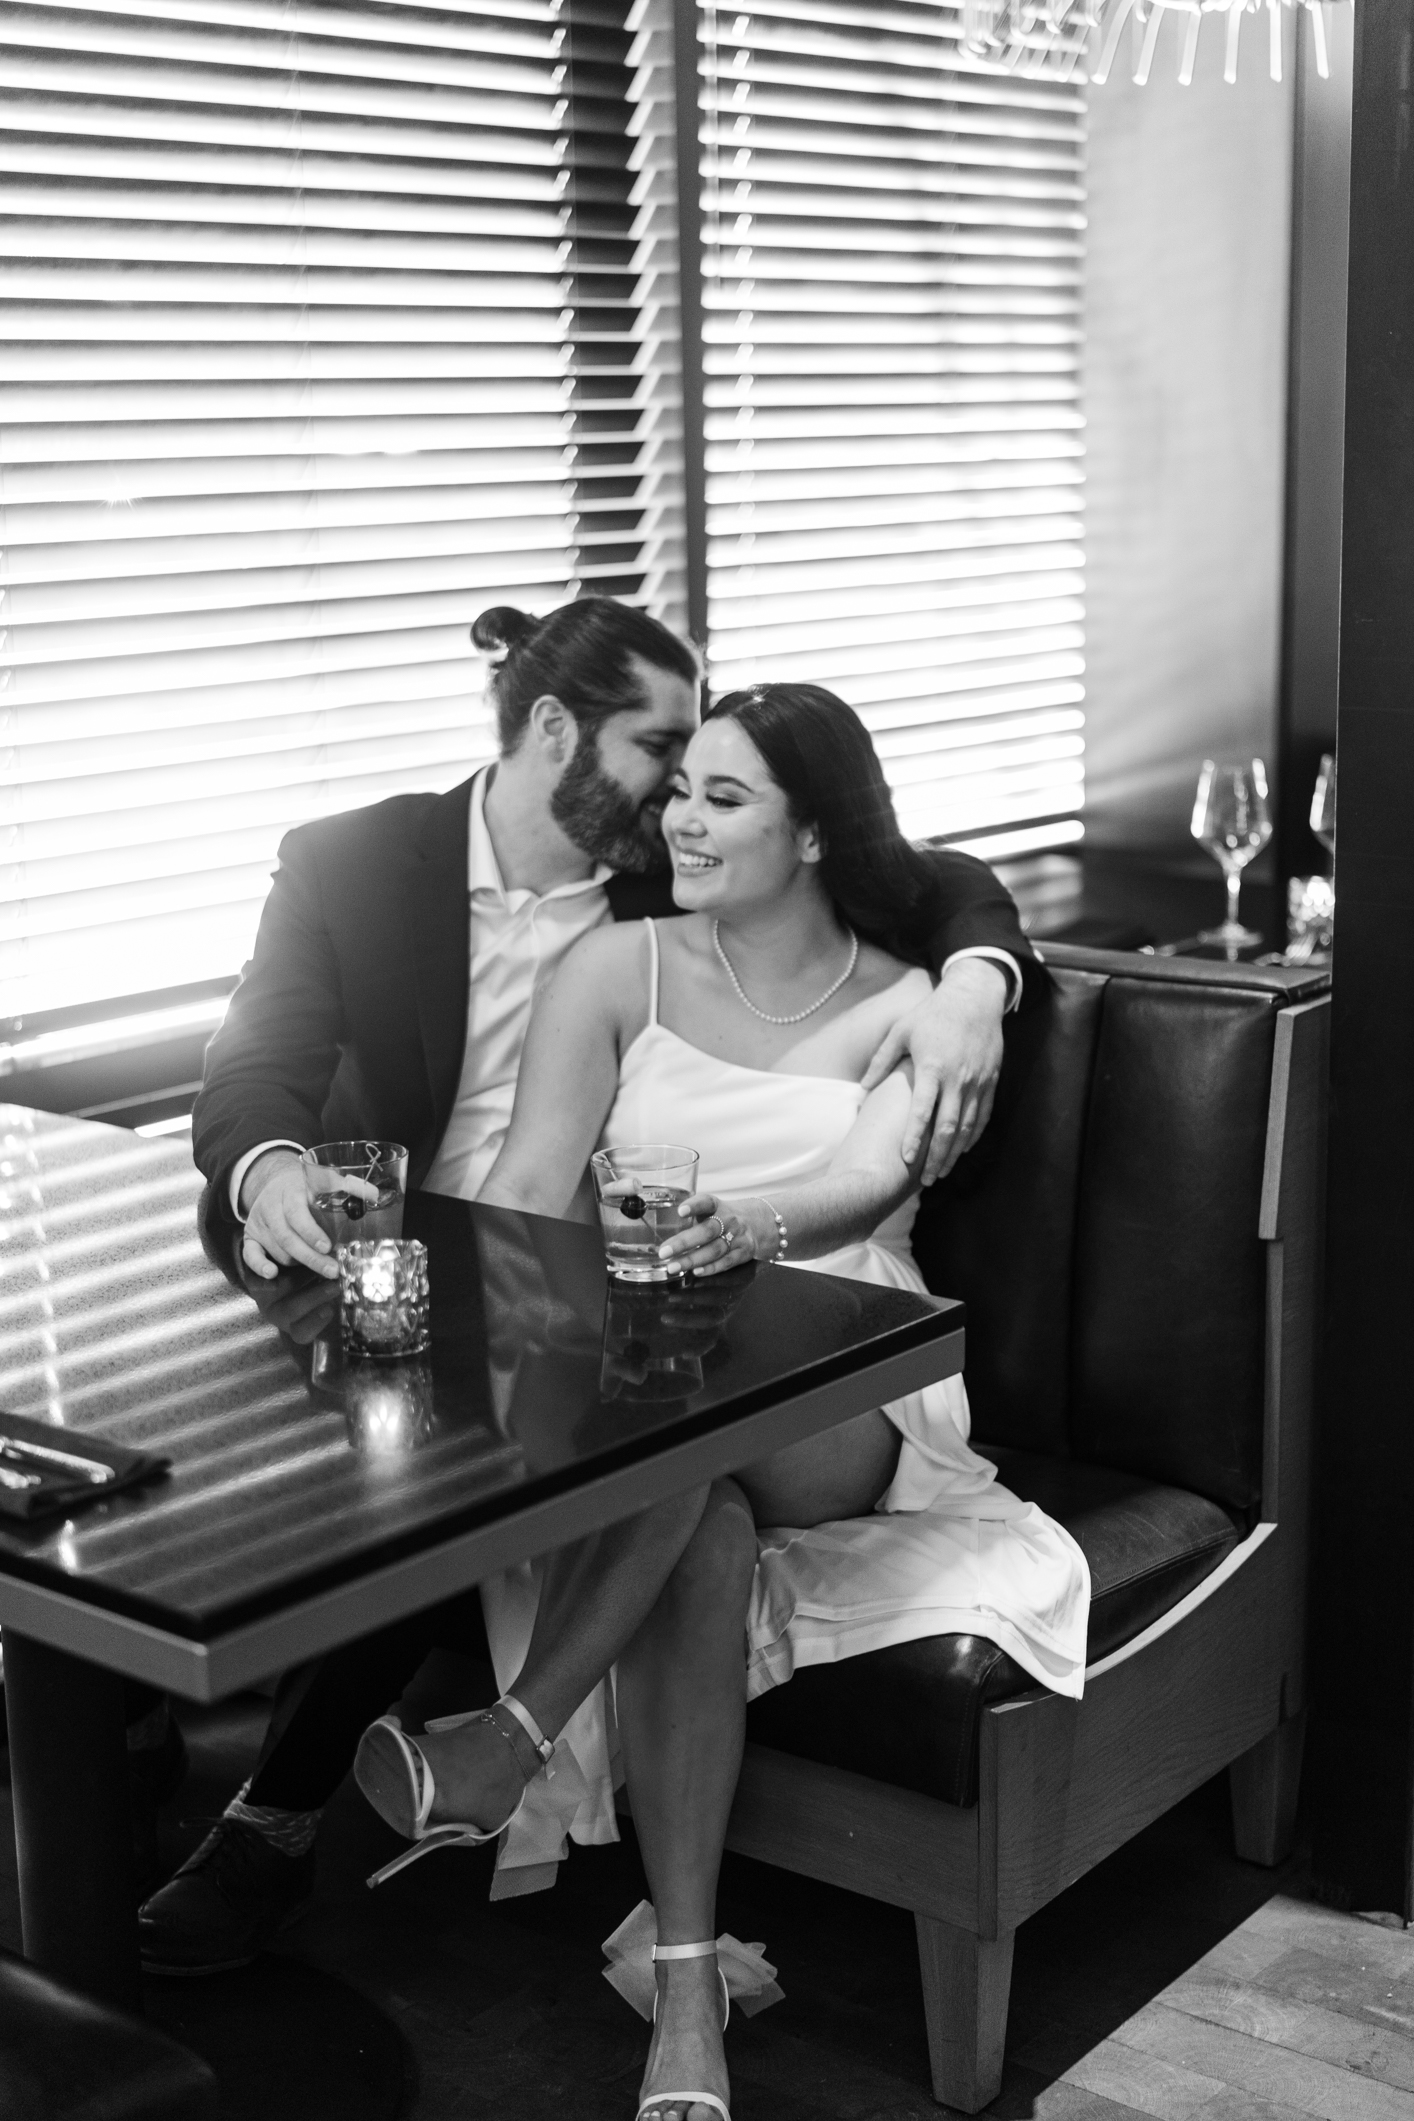 Engagement session at The Otis hotel in Austin, TX